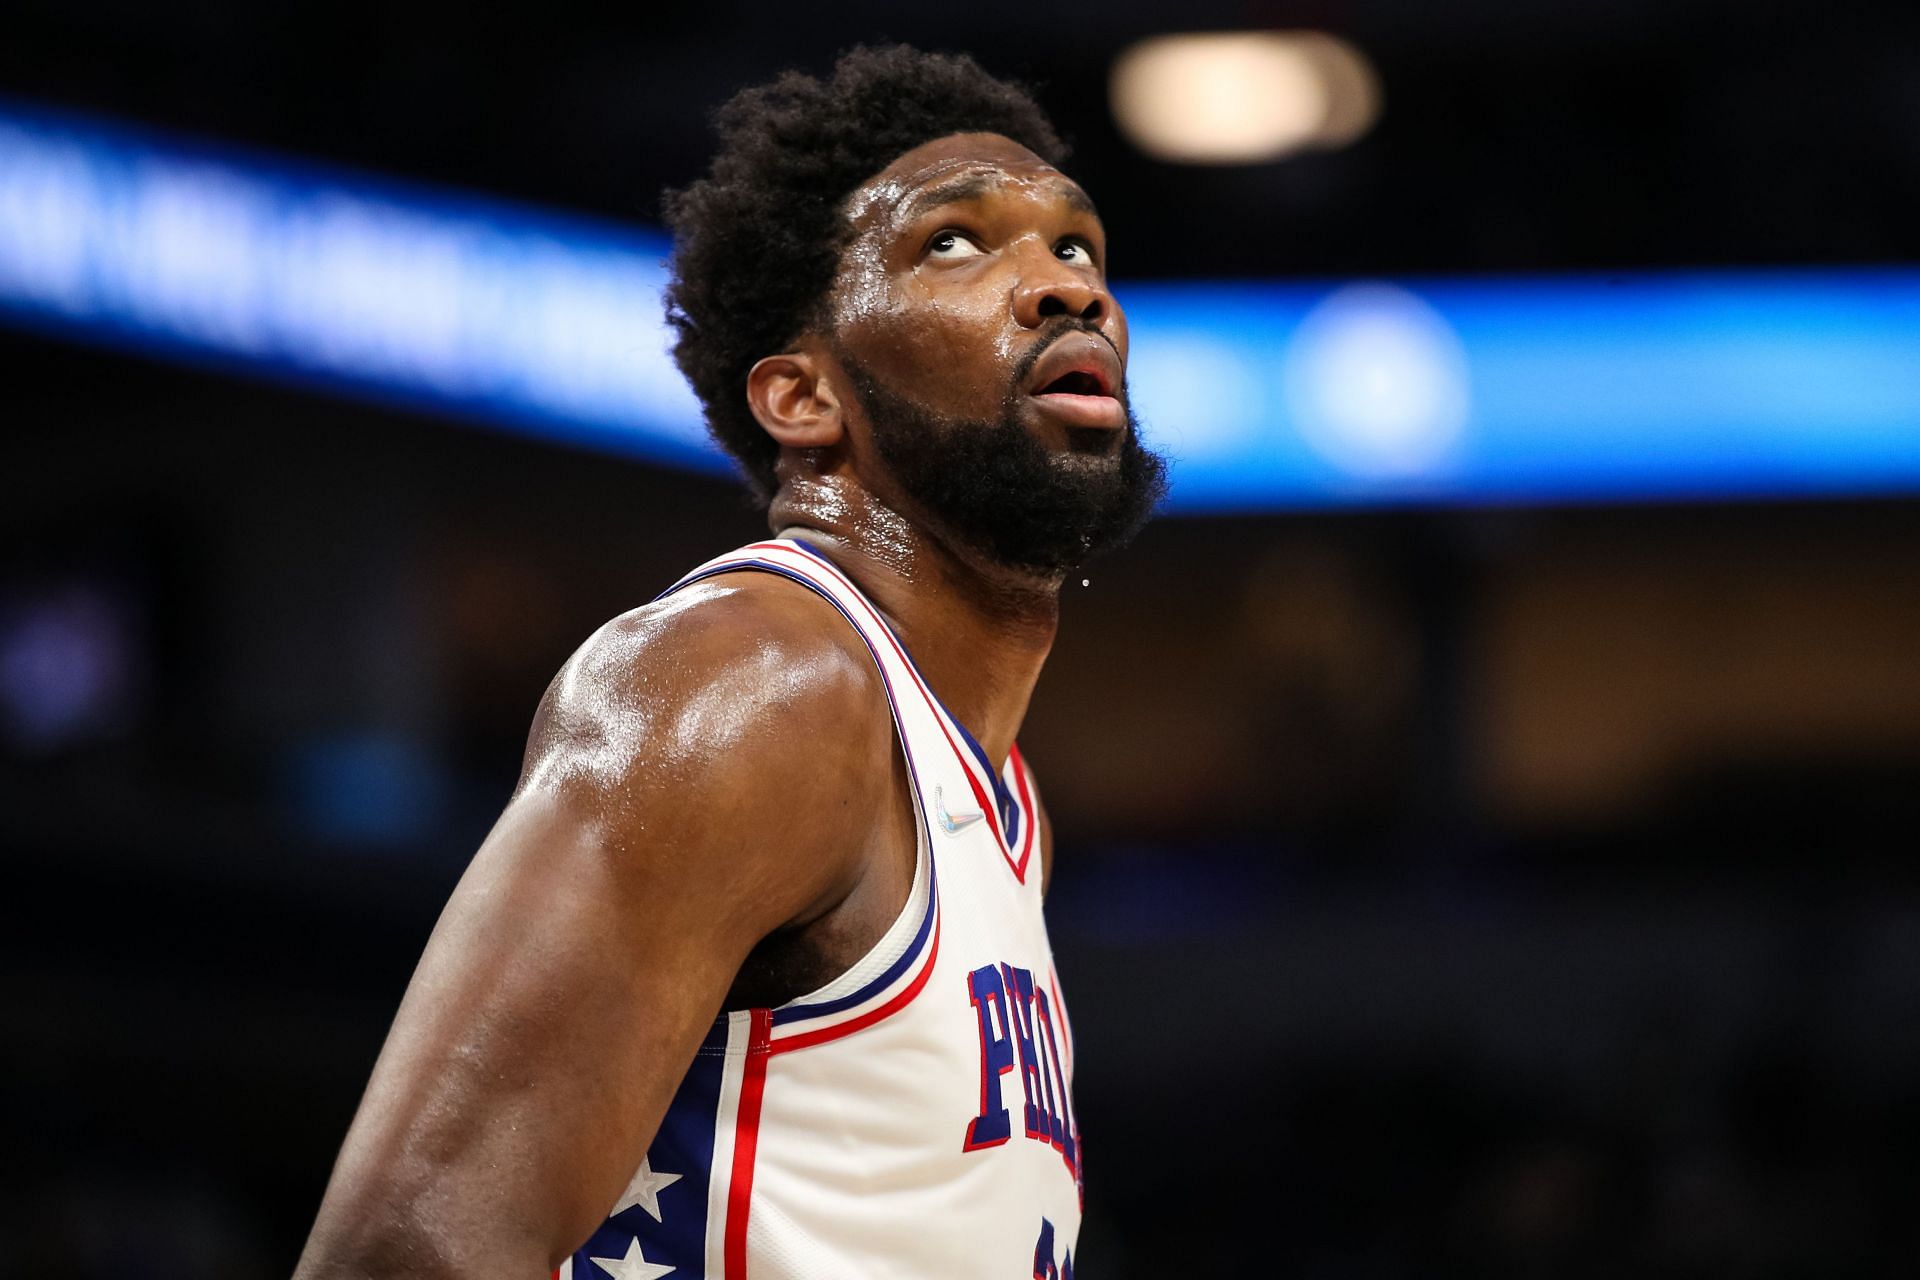 Joel Embiid will be hoping to continue his run of brilliance for the Philadelphia 76ers this season.